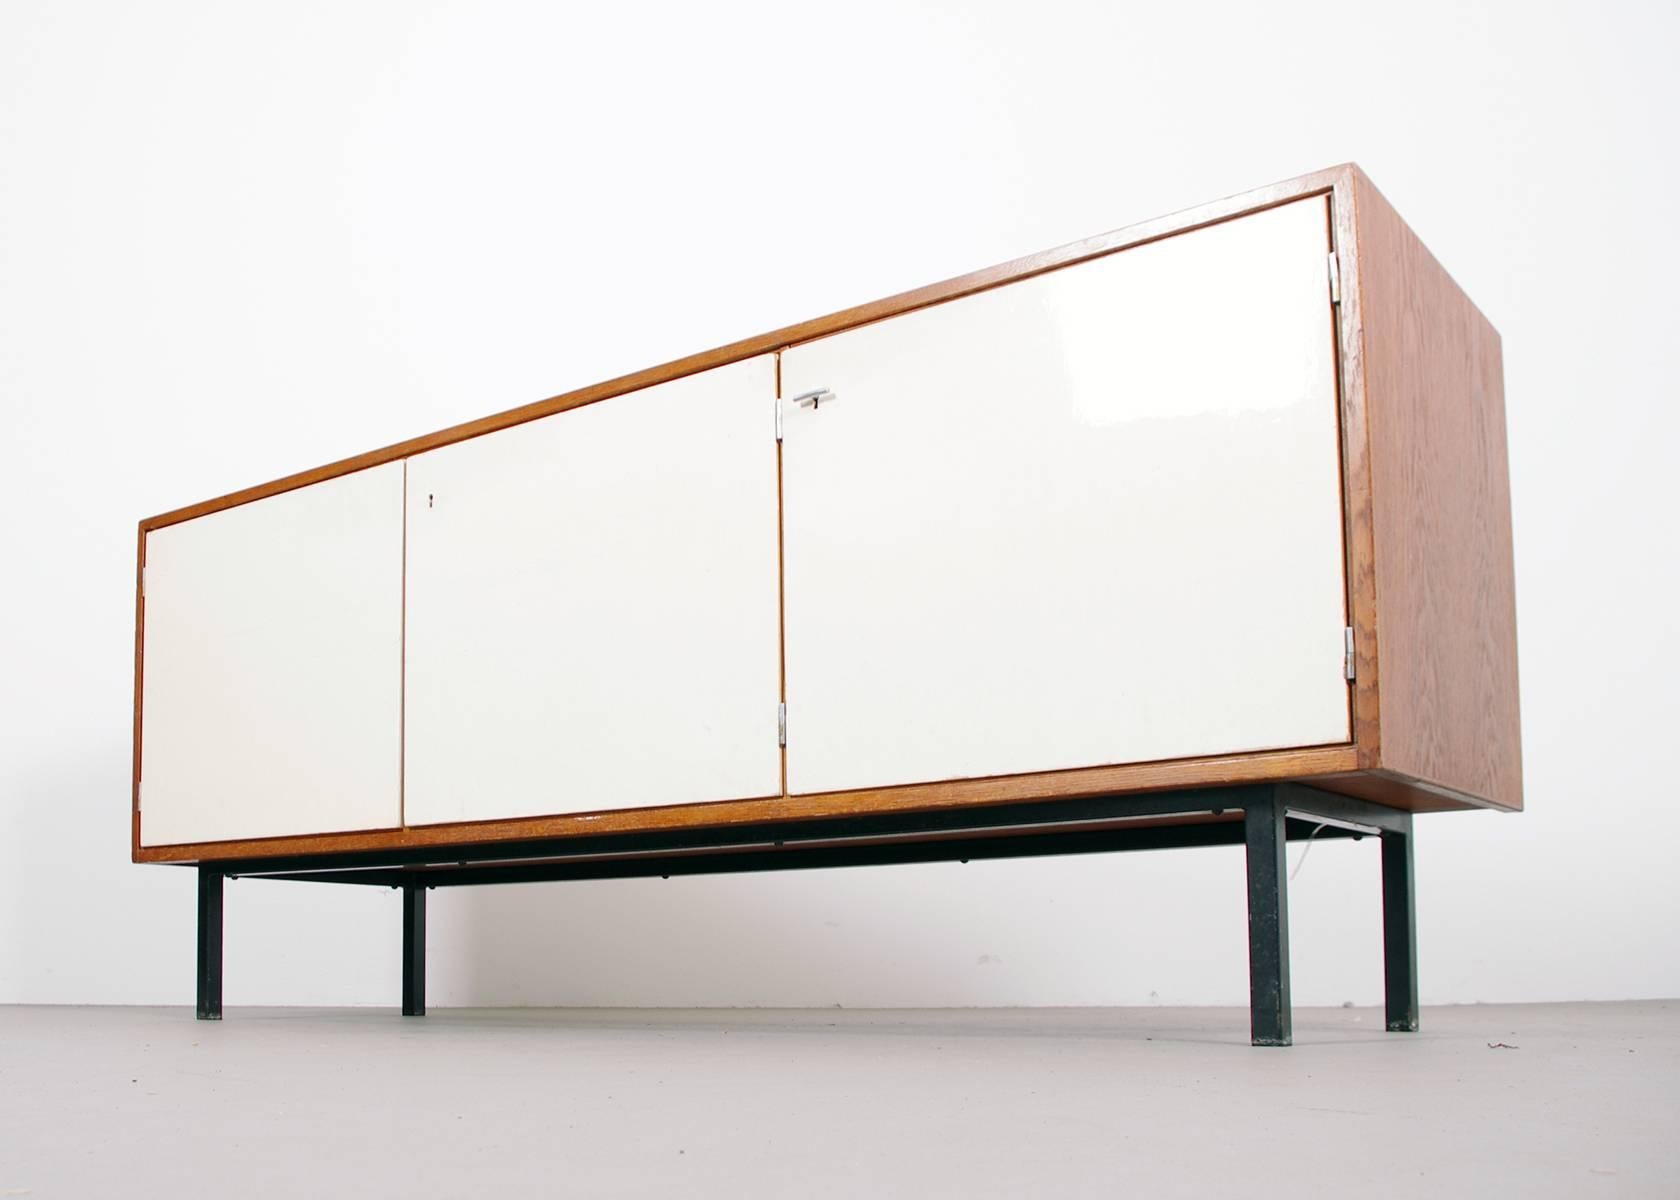 Nice small credenza by Martin Visser for ‘t Spectrum in 1959. Only shortly produced late 1950s. Black metal base with wenge wood and white painted doors with T-shaped keys. All original good condition.